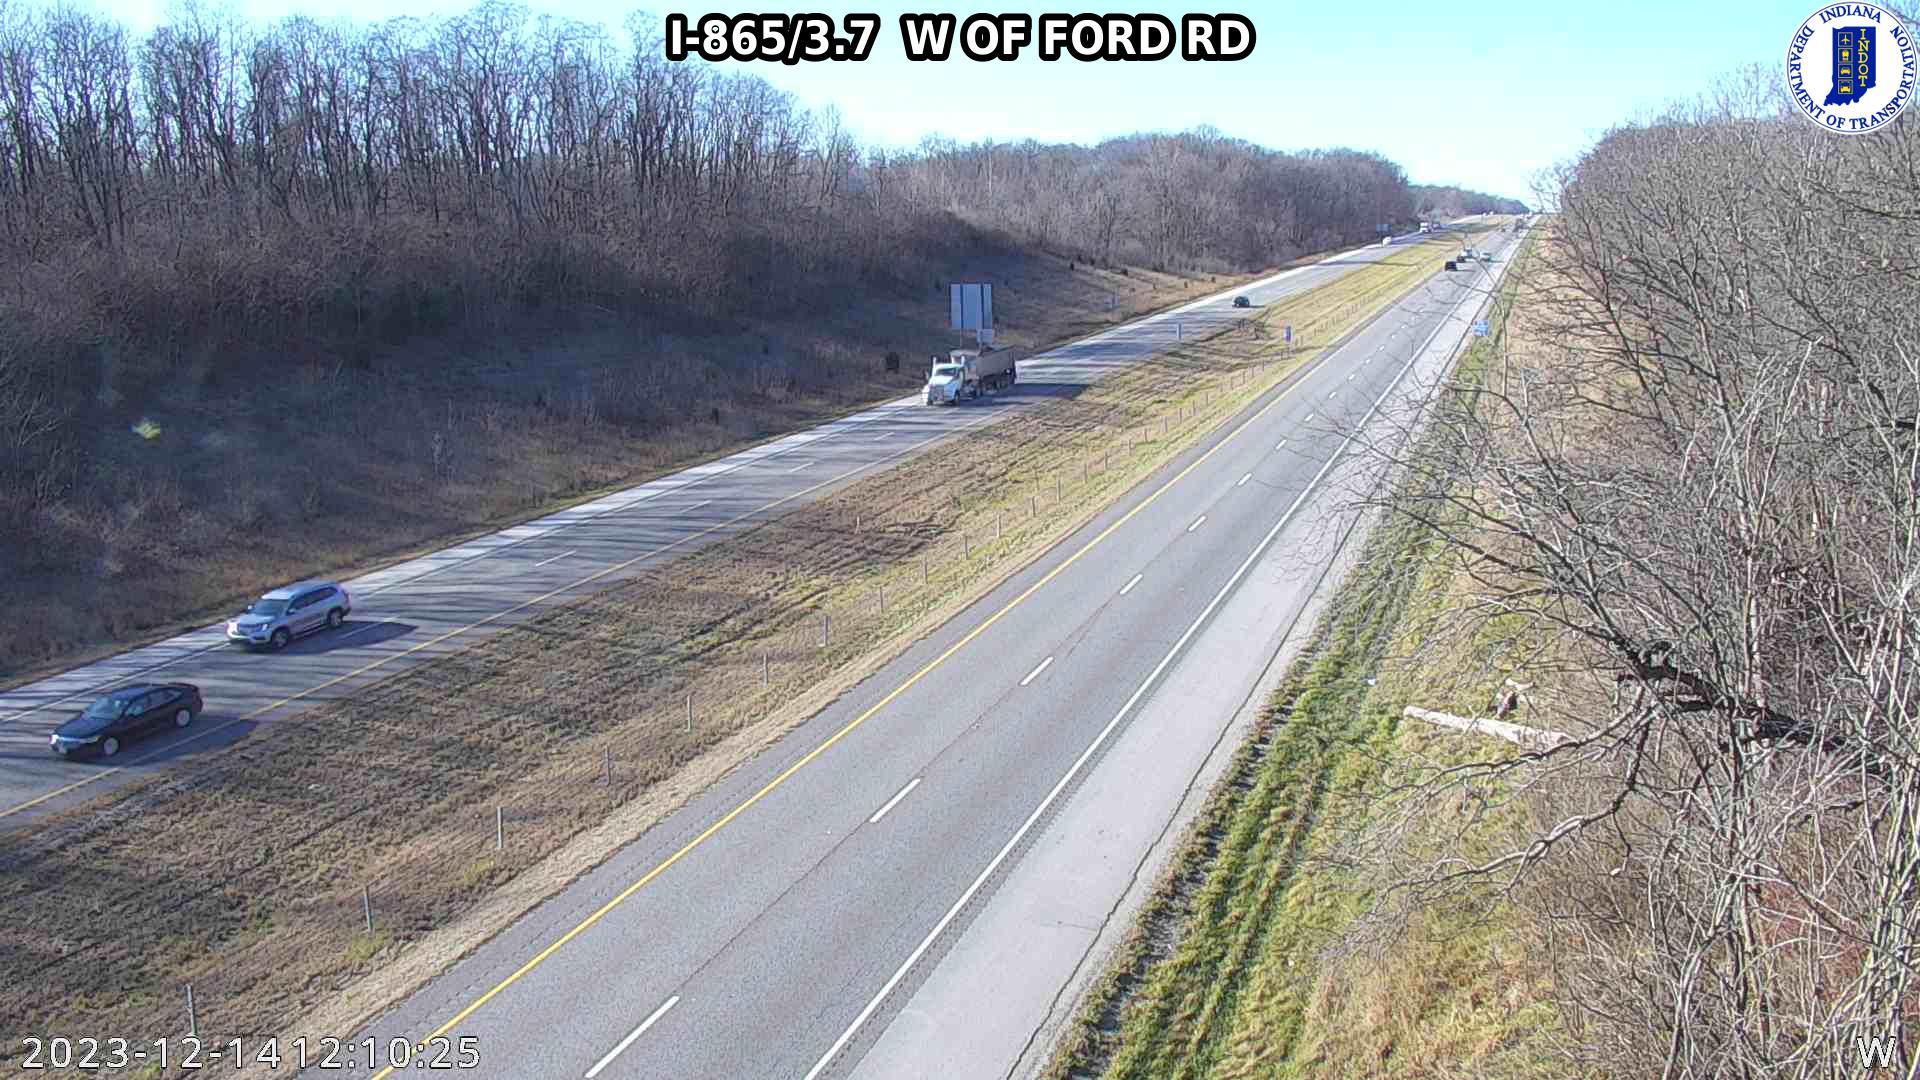 Traffic Cam Zionsville: I-865: I-865/3.7 W OF FORD RD Player